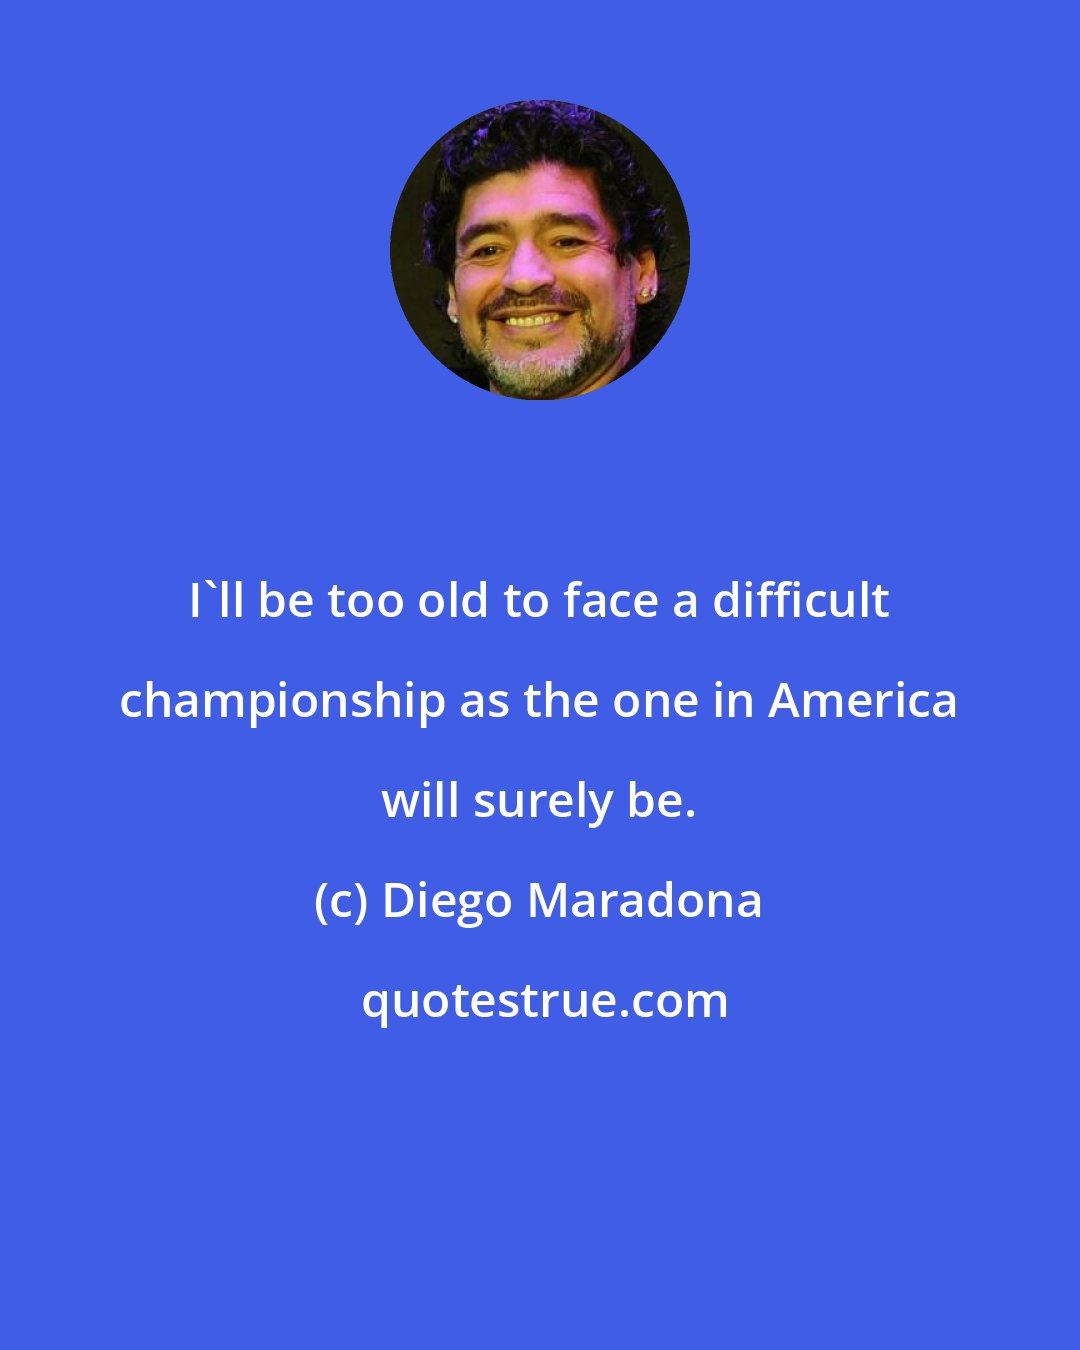 Diego Maradona: I'll be too old to face a difficult championship as the one in America will surely be.